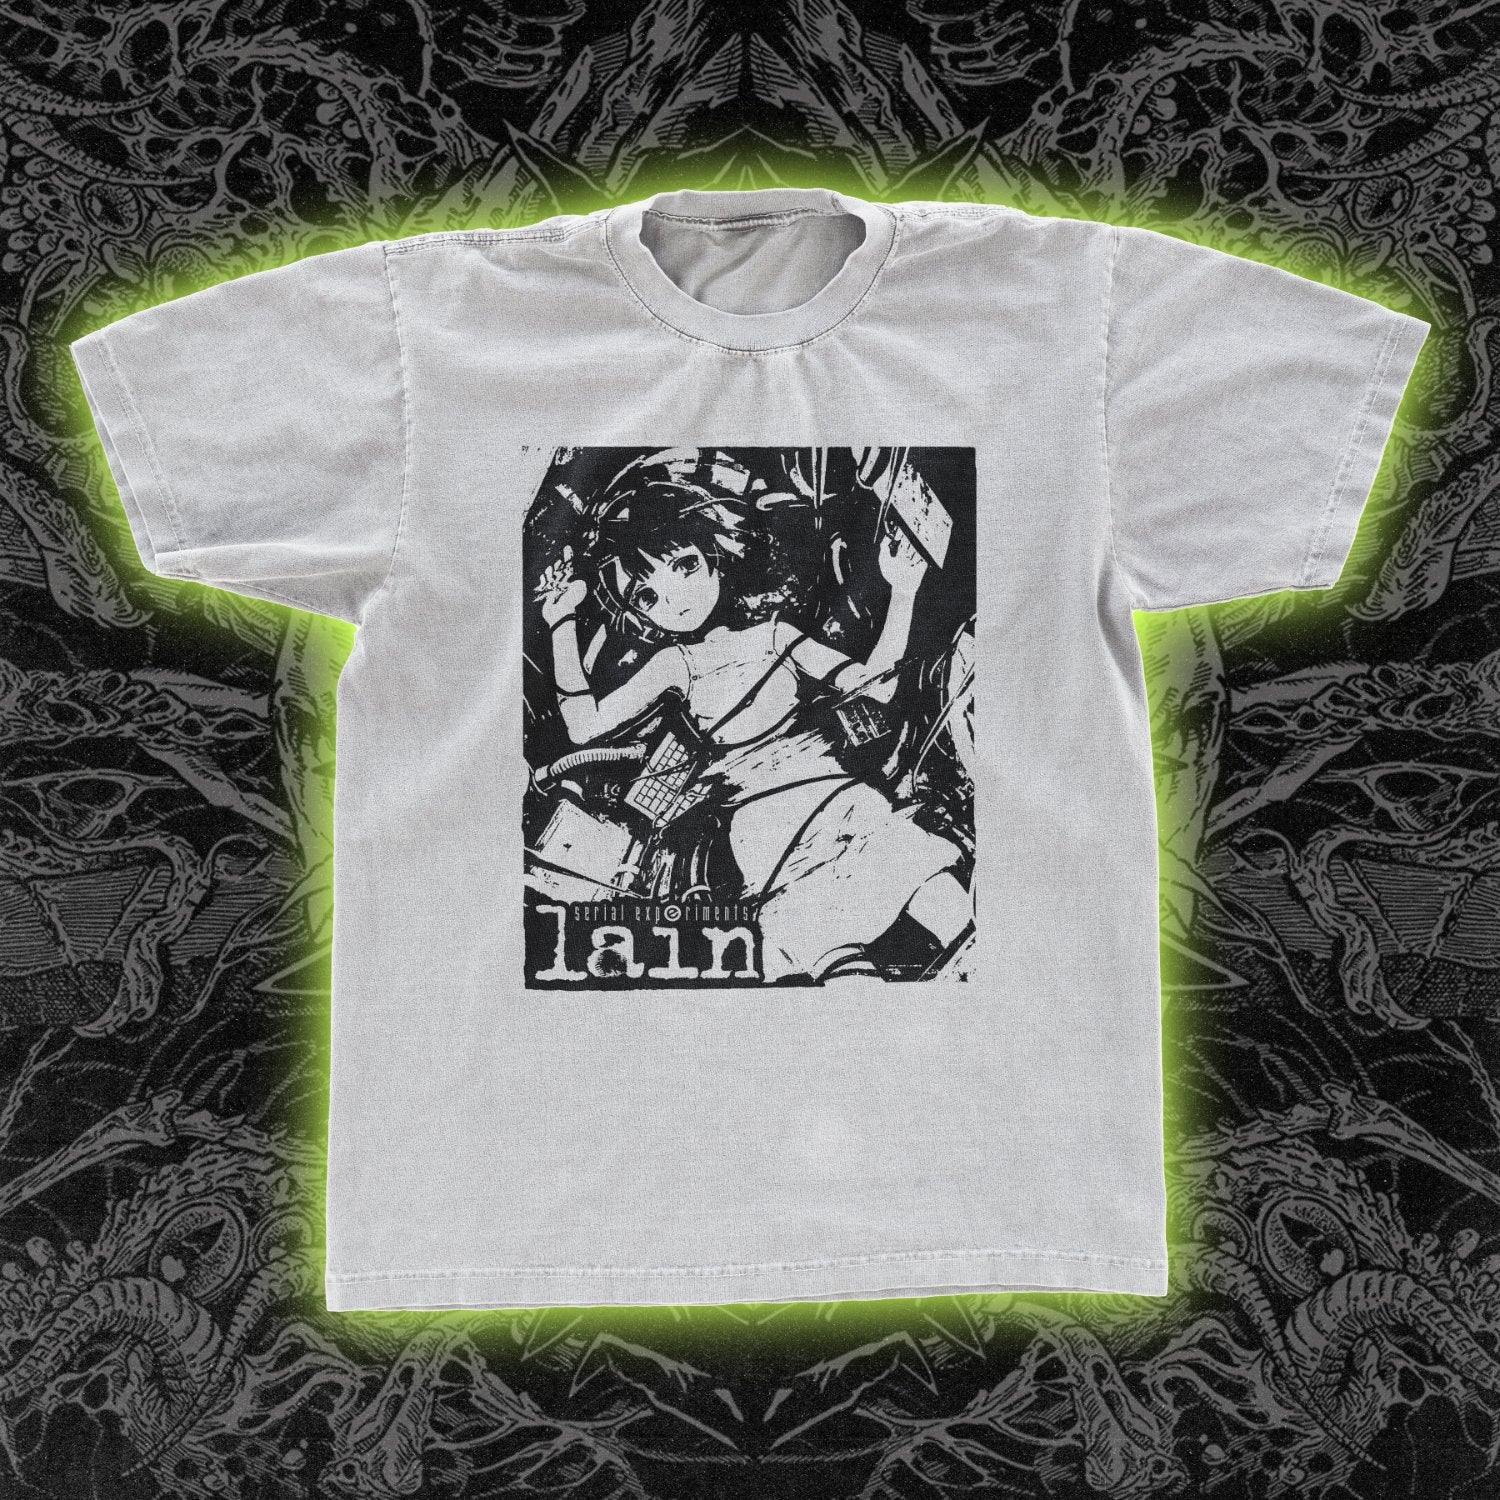 Serial Experiments Lain Classic Tee